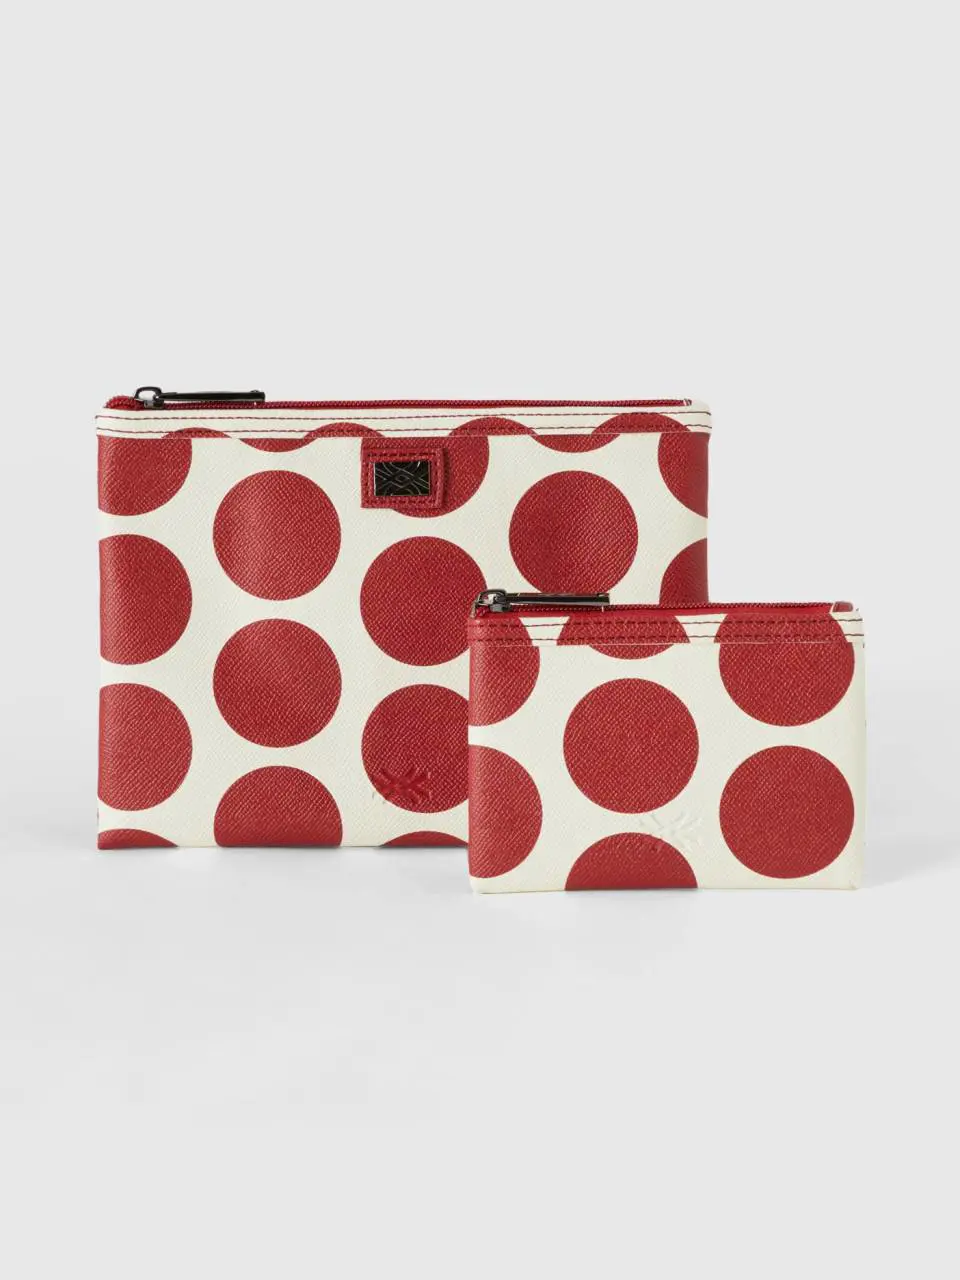 Benetton two white bags with red polka dots. 1